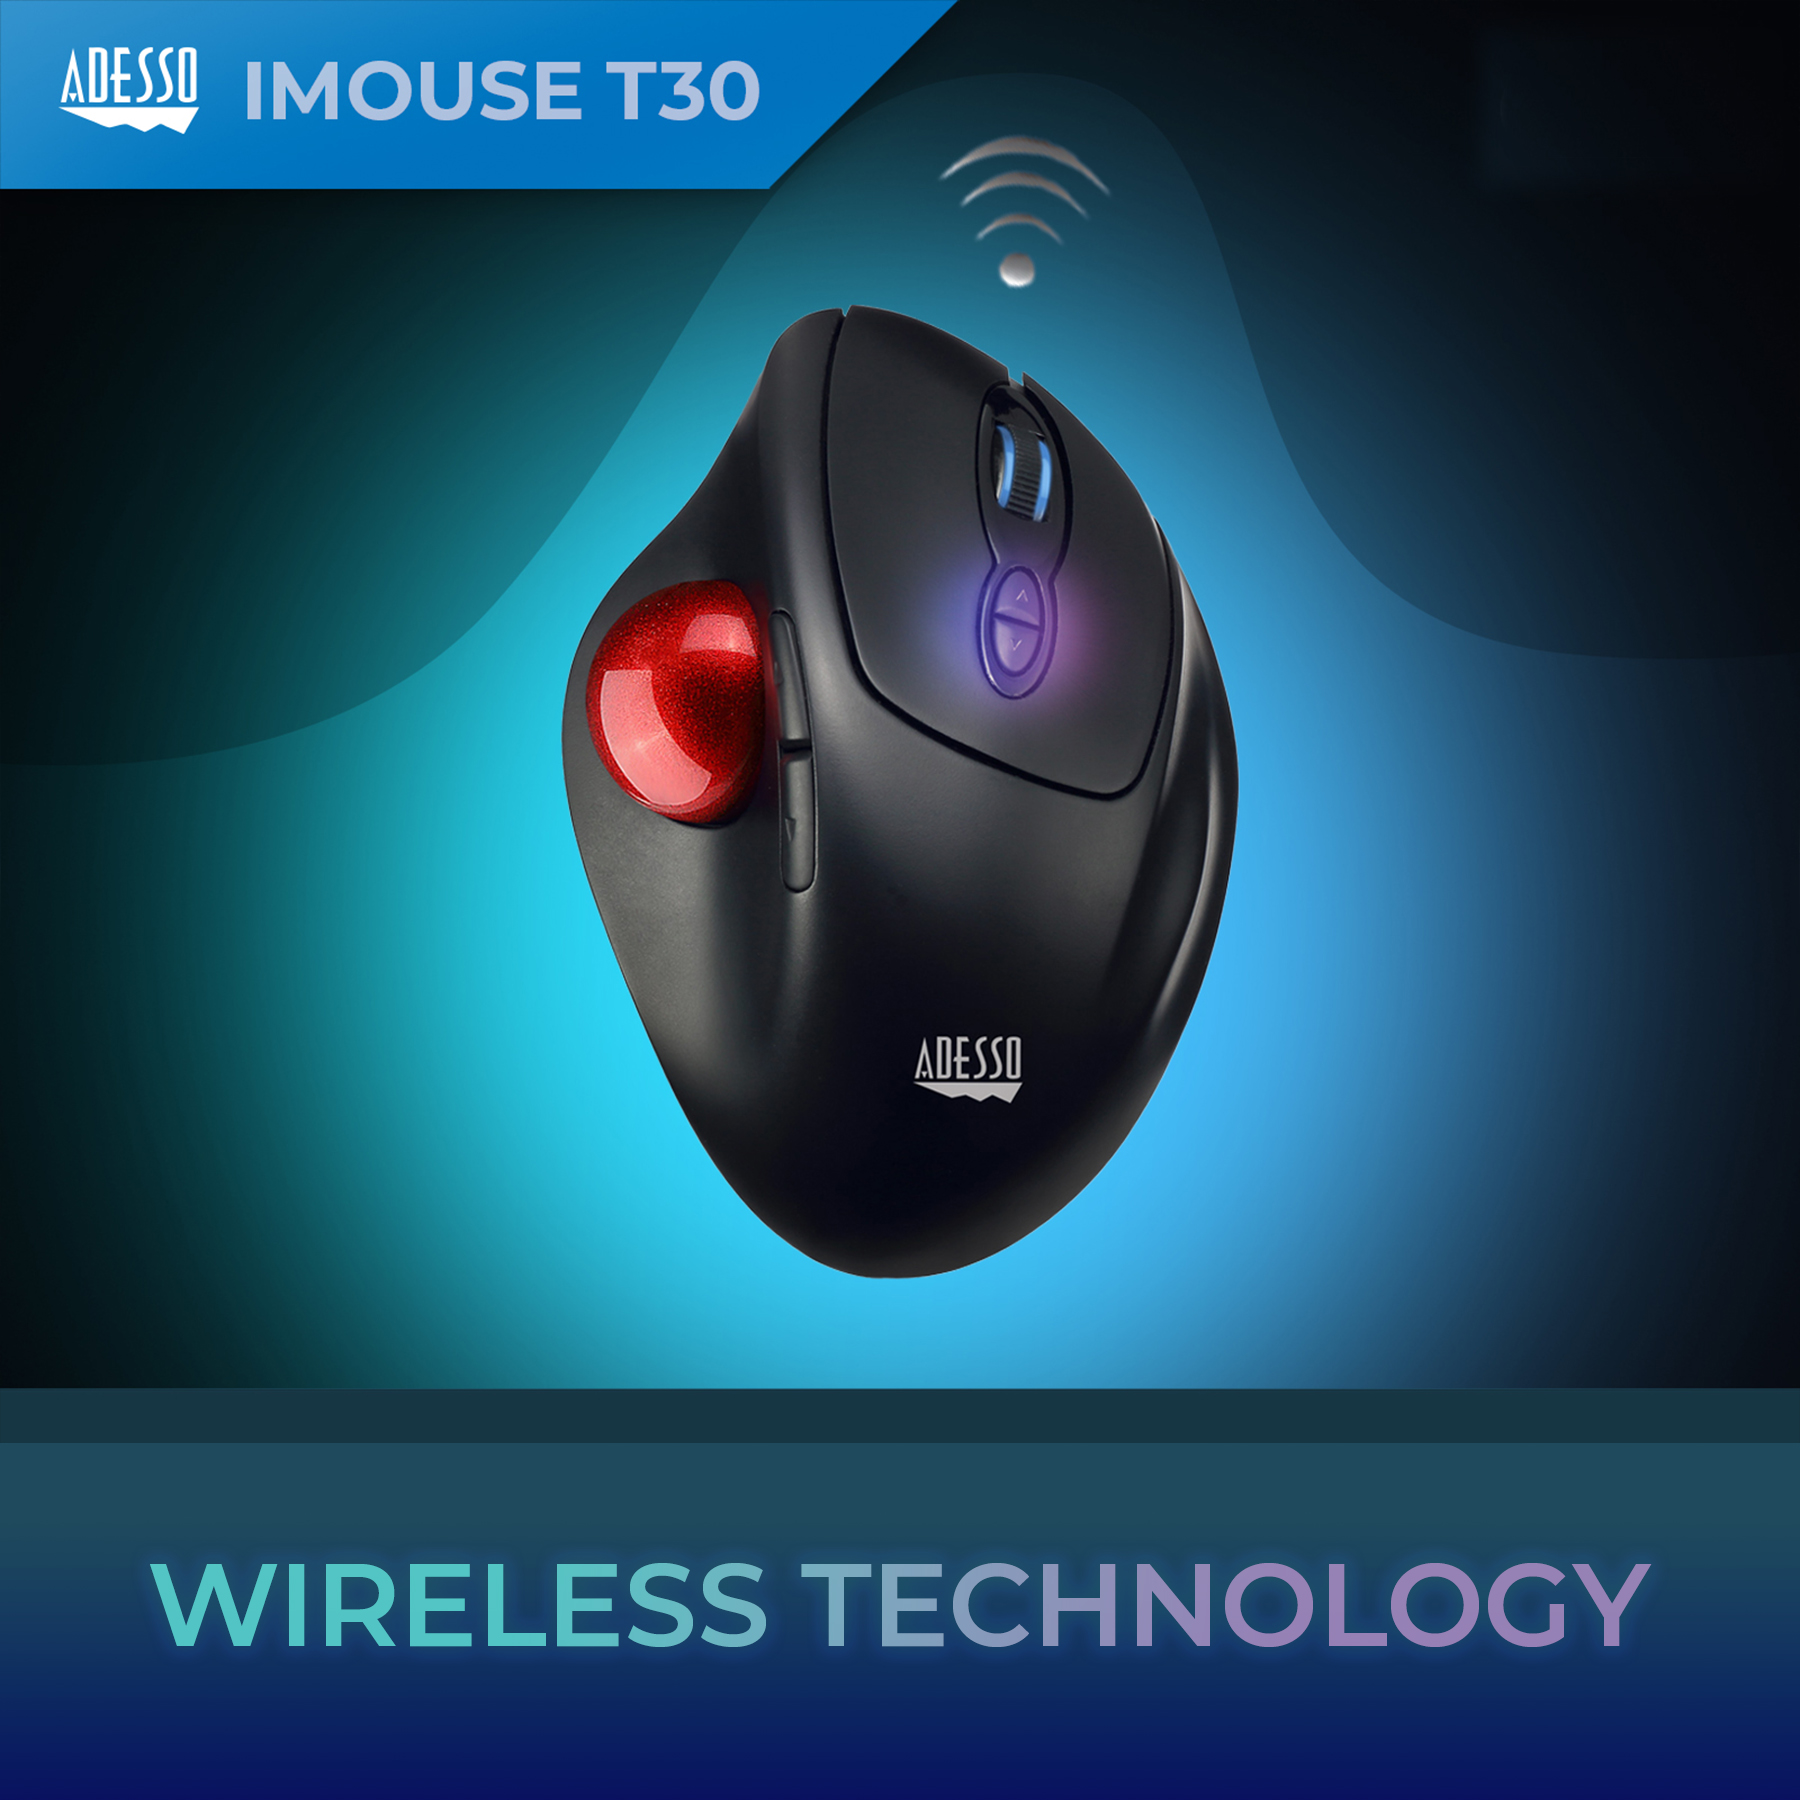 iMouse T30 Wireless copy